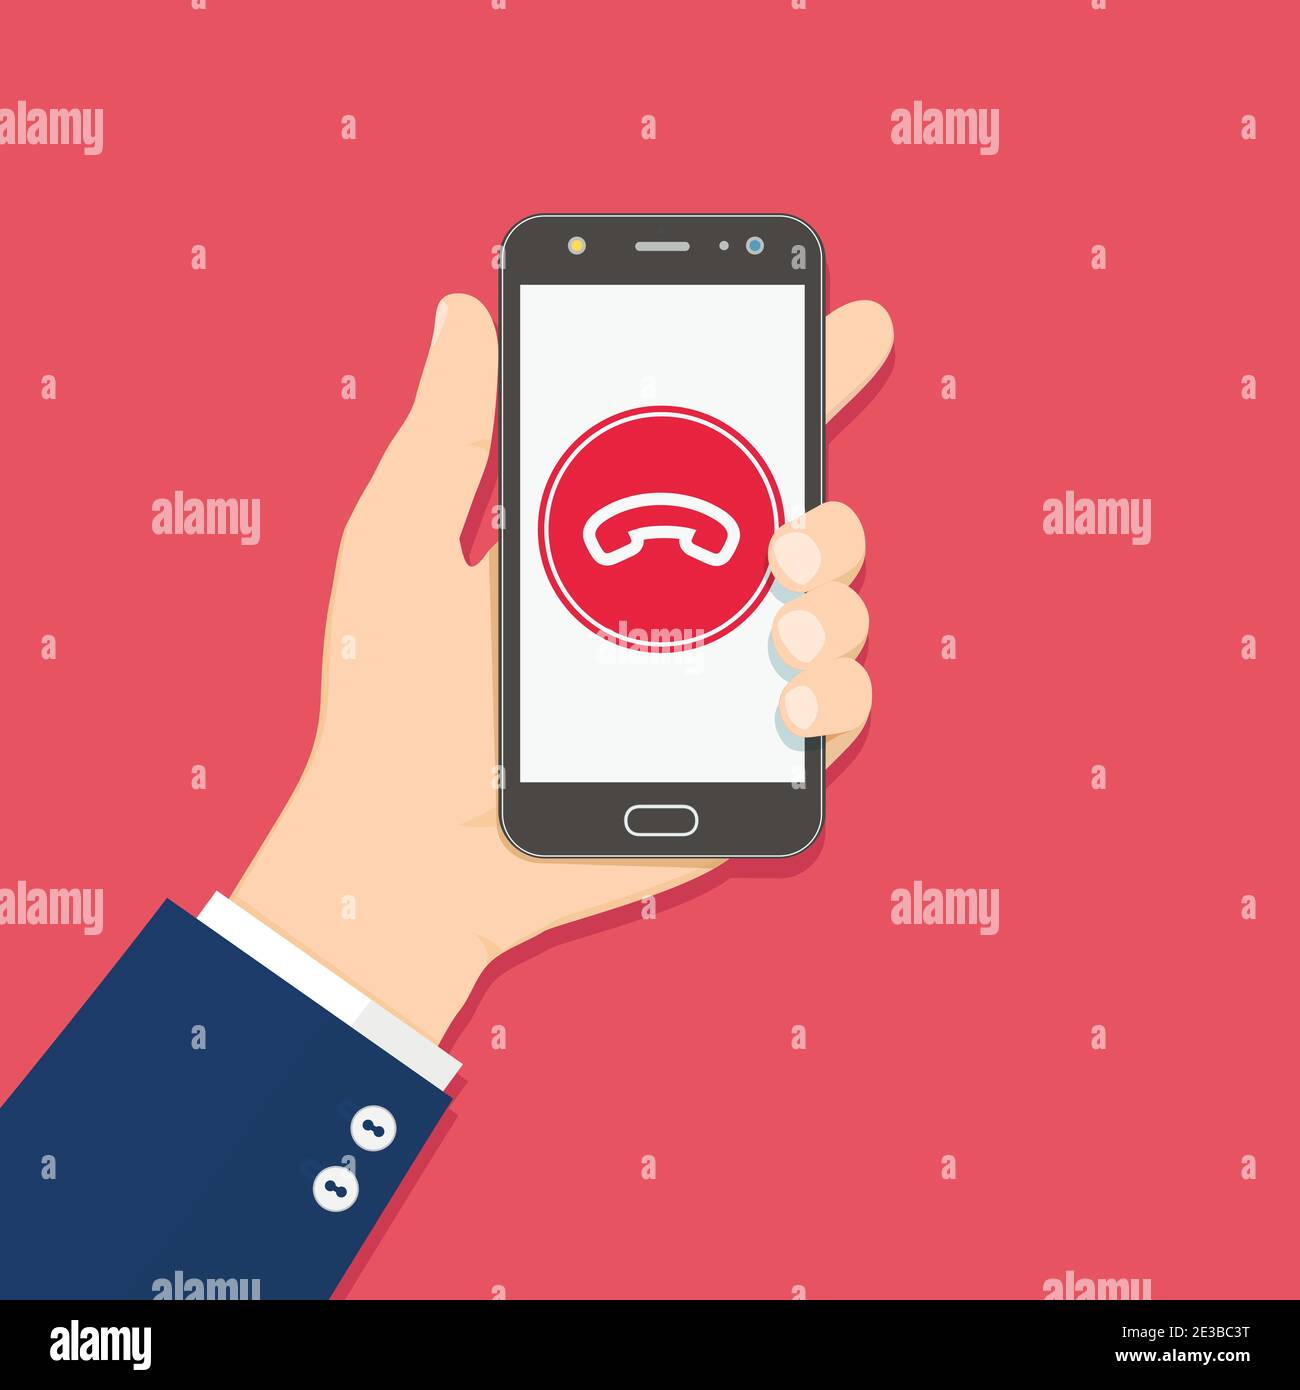 Decline phone call. Decline call button on smartphone screen. Hand holding mobile phone. Modern flat design. Vector illustration. Stock Vector